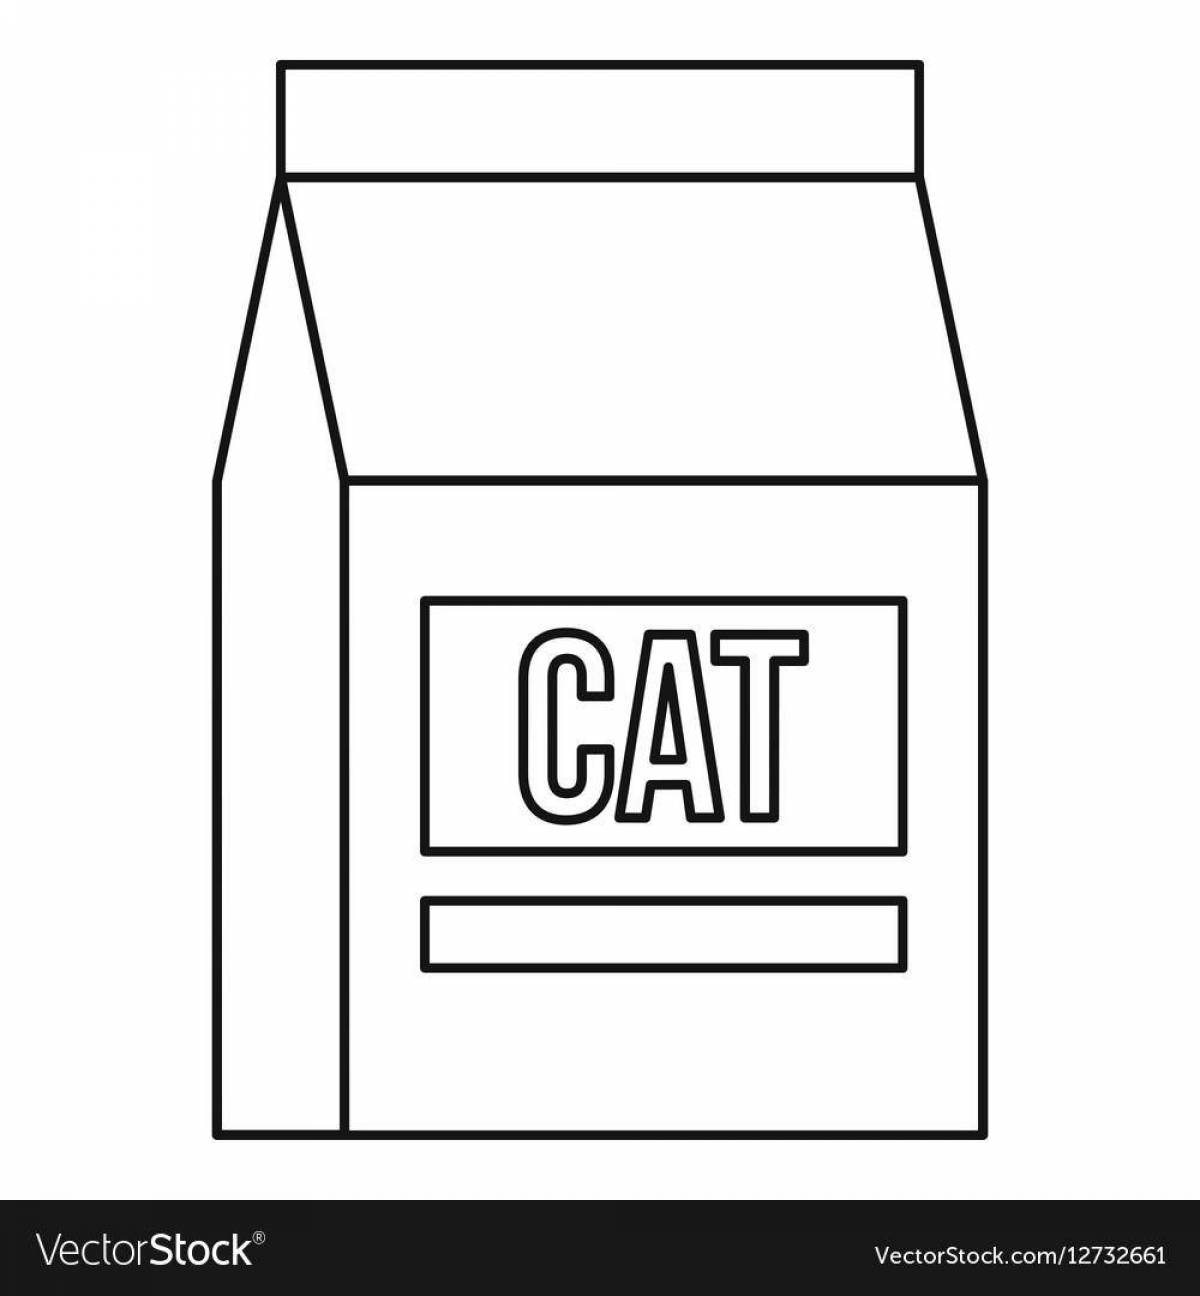 Great cat food coloring page